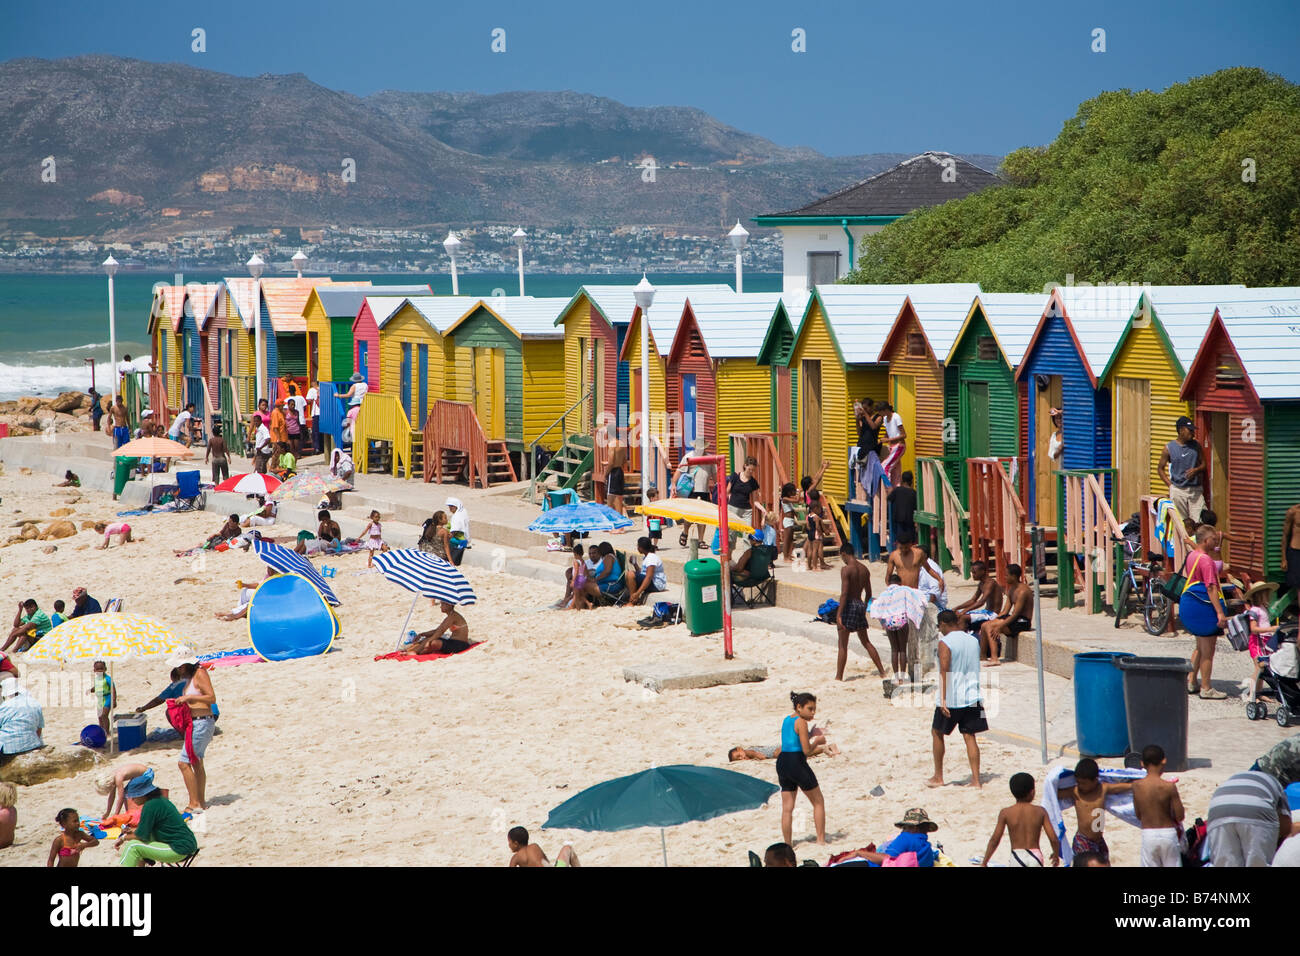 Beachside huts for changing into swimwear on the Cape Stock Photo - Alamy